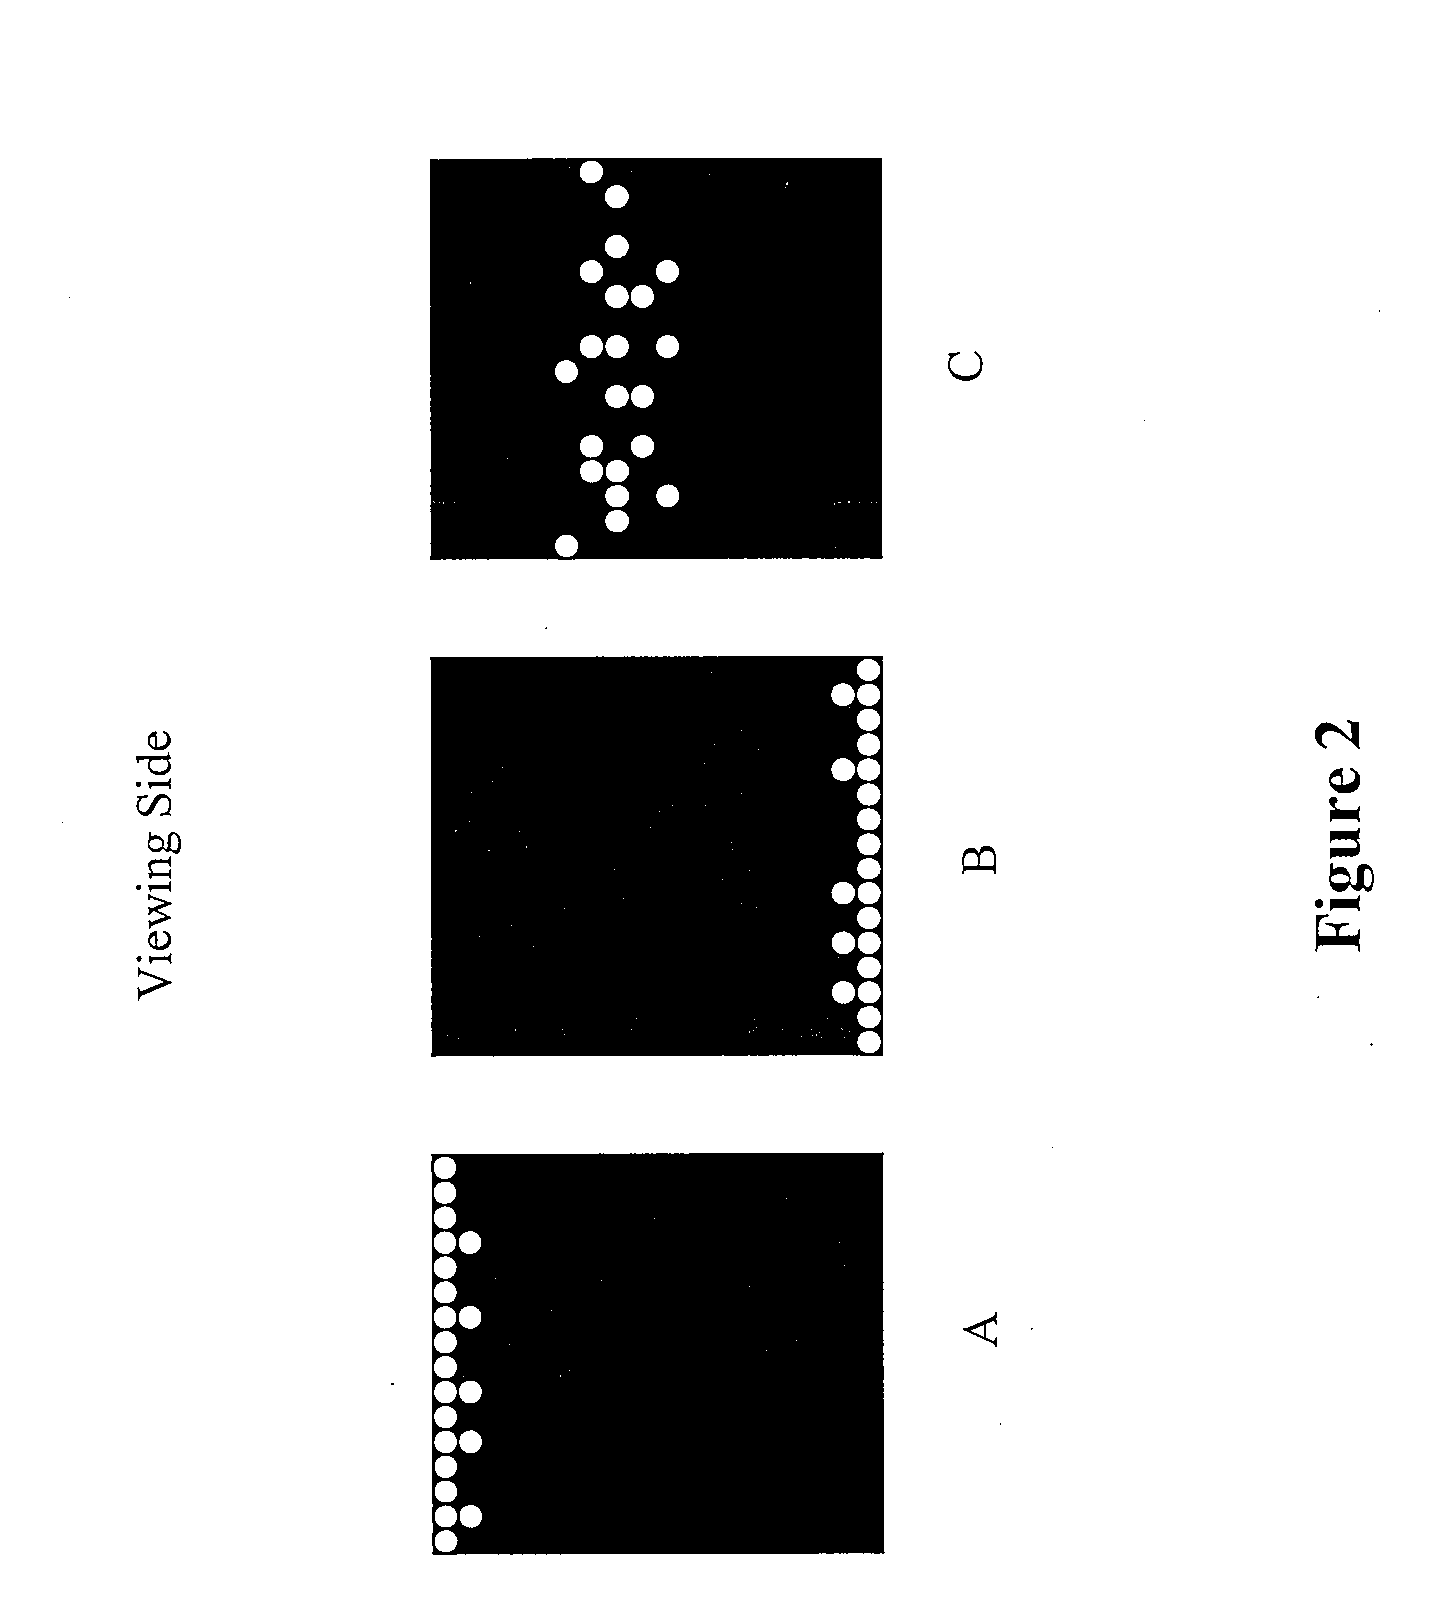 Driving Method To Neutralize Grey Level Shift For Electrophoretic Displays